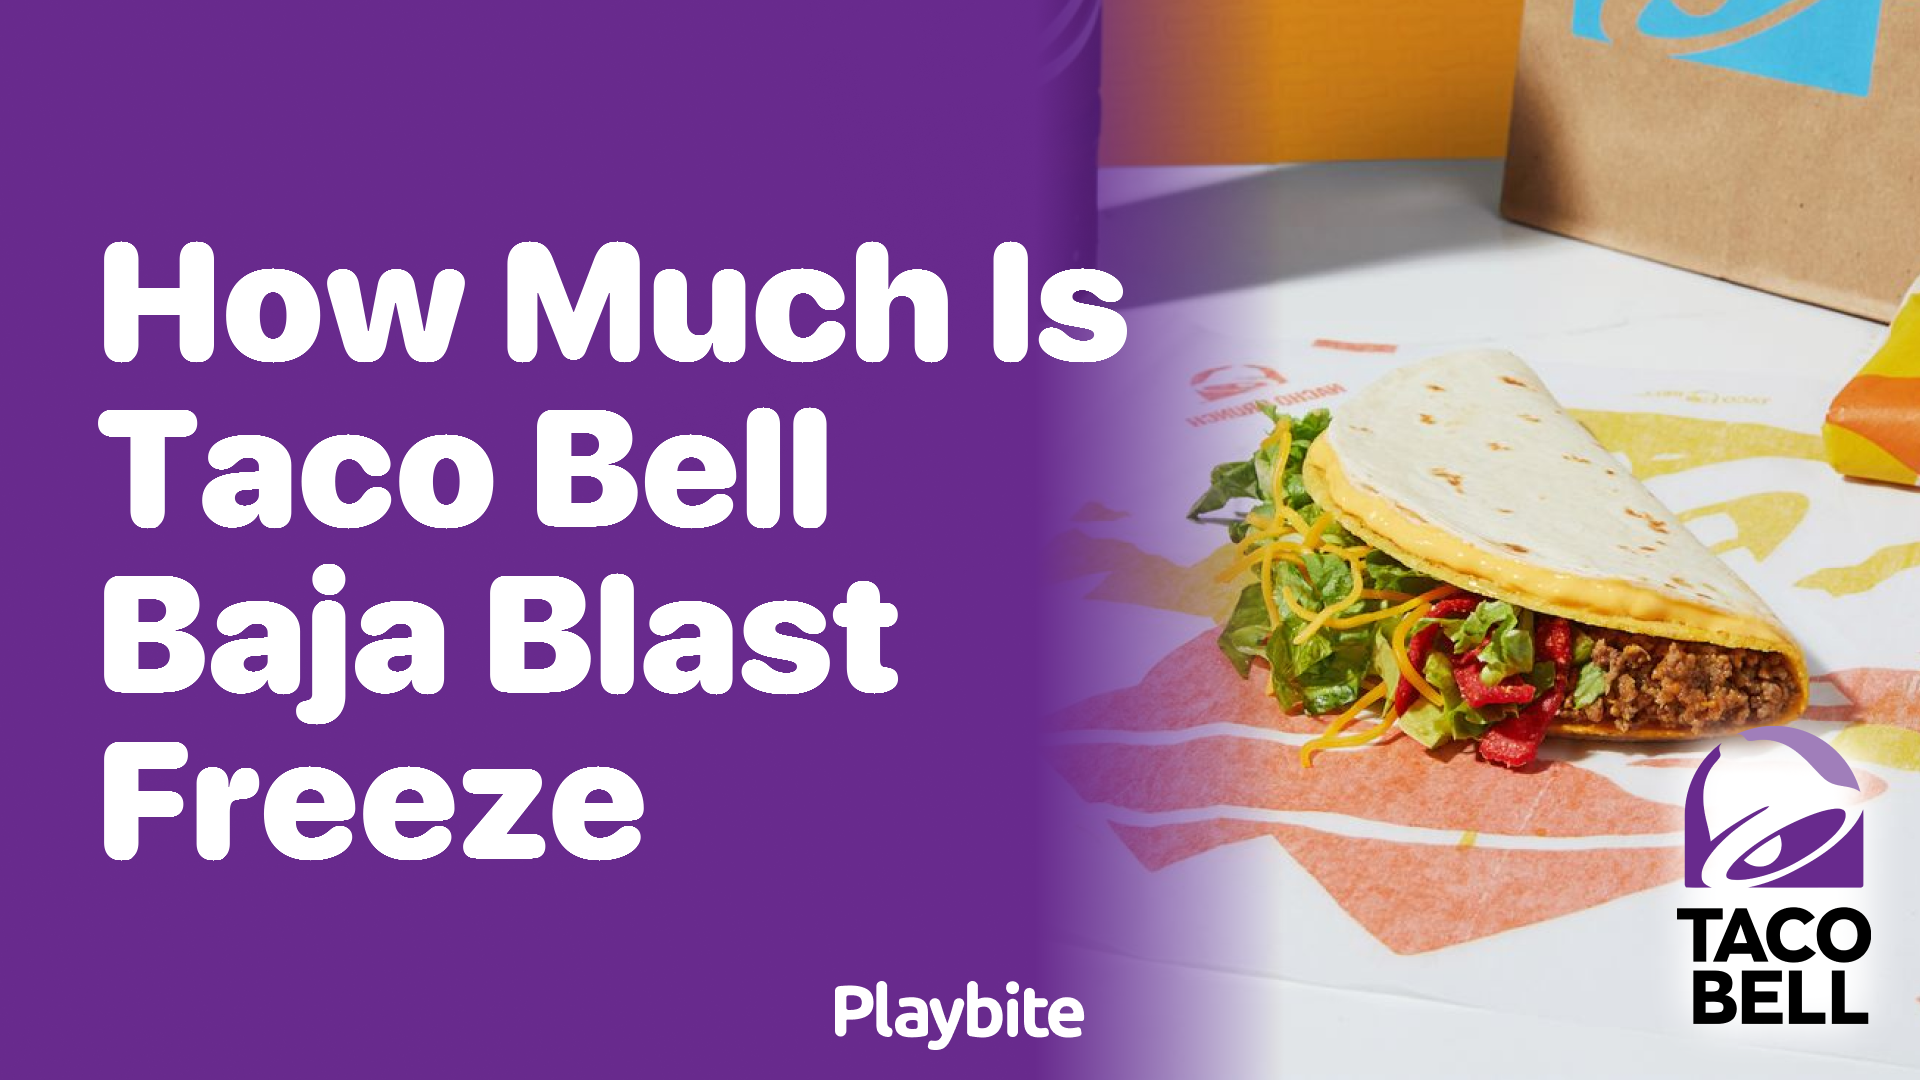 How Much Does a Taco Bell Baja Blast Freeze Cost?